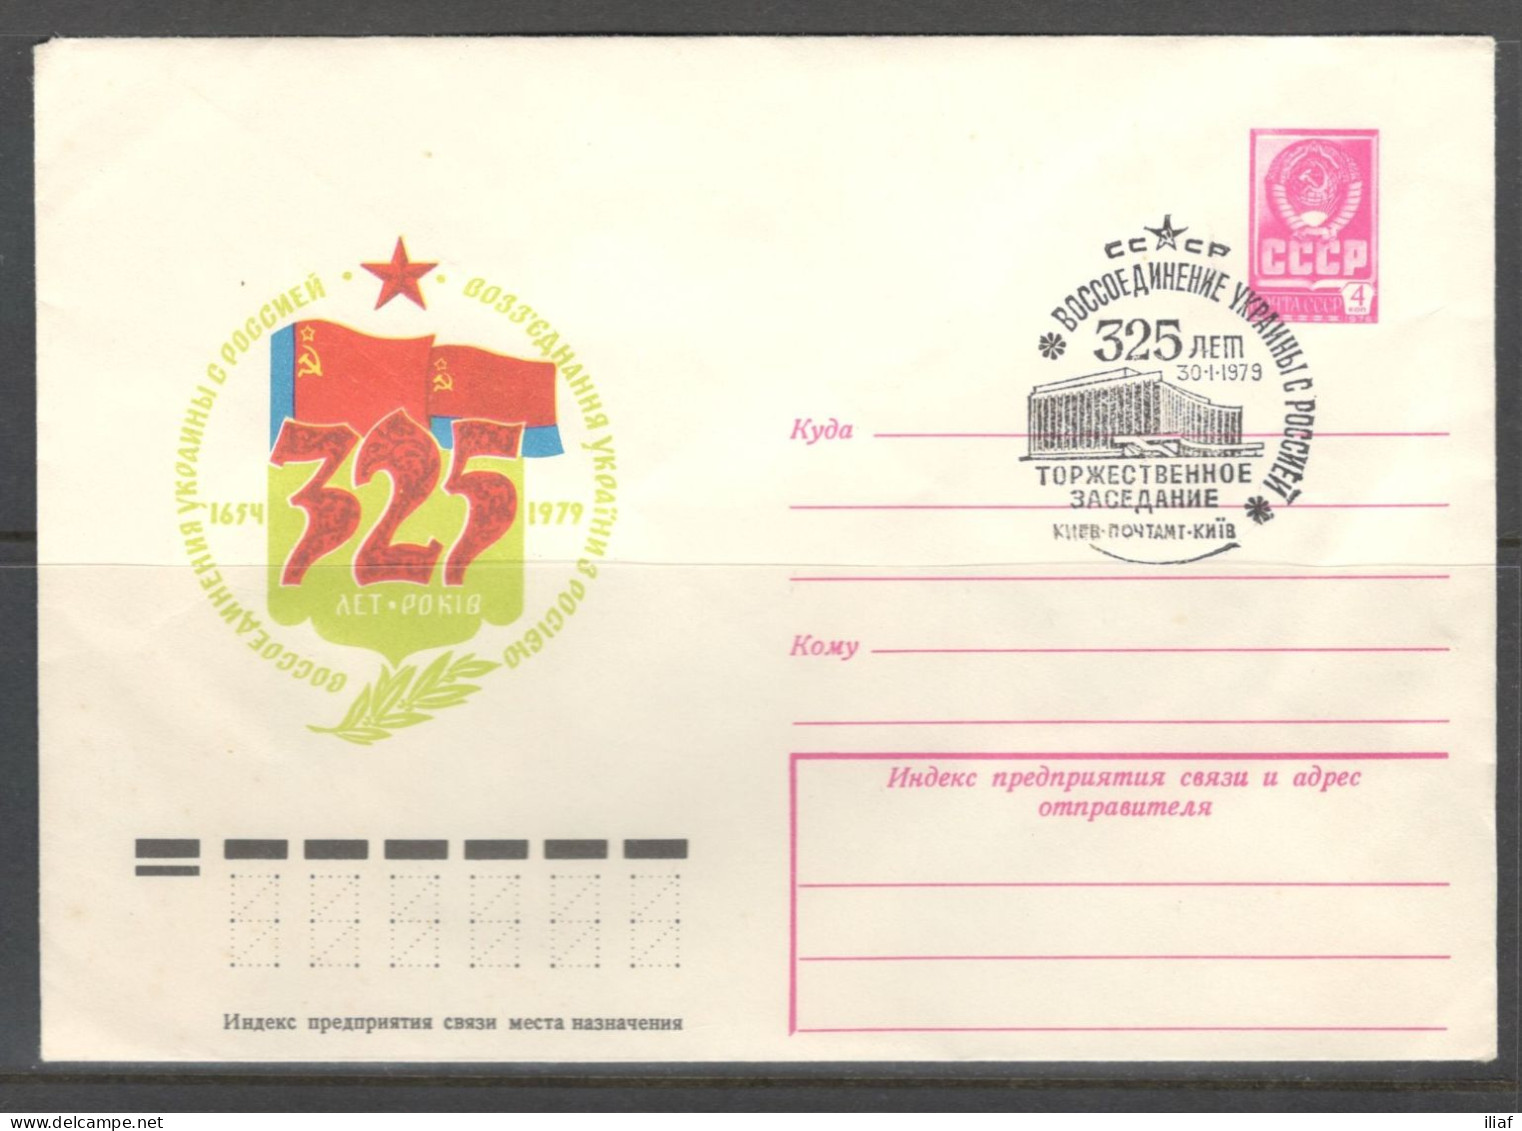 RUSSIA & USSR. 325 Years Of Reunification Of Ukraine With RUSSIA & USSR.  Illustrated Envelope With Special Cancellation - Ukraine